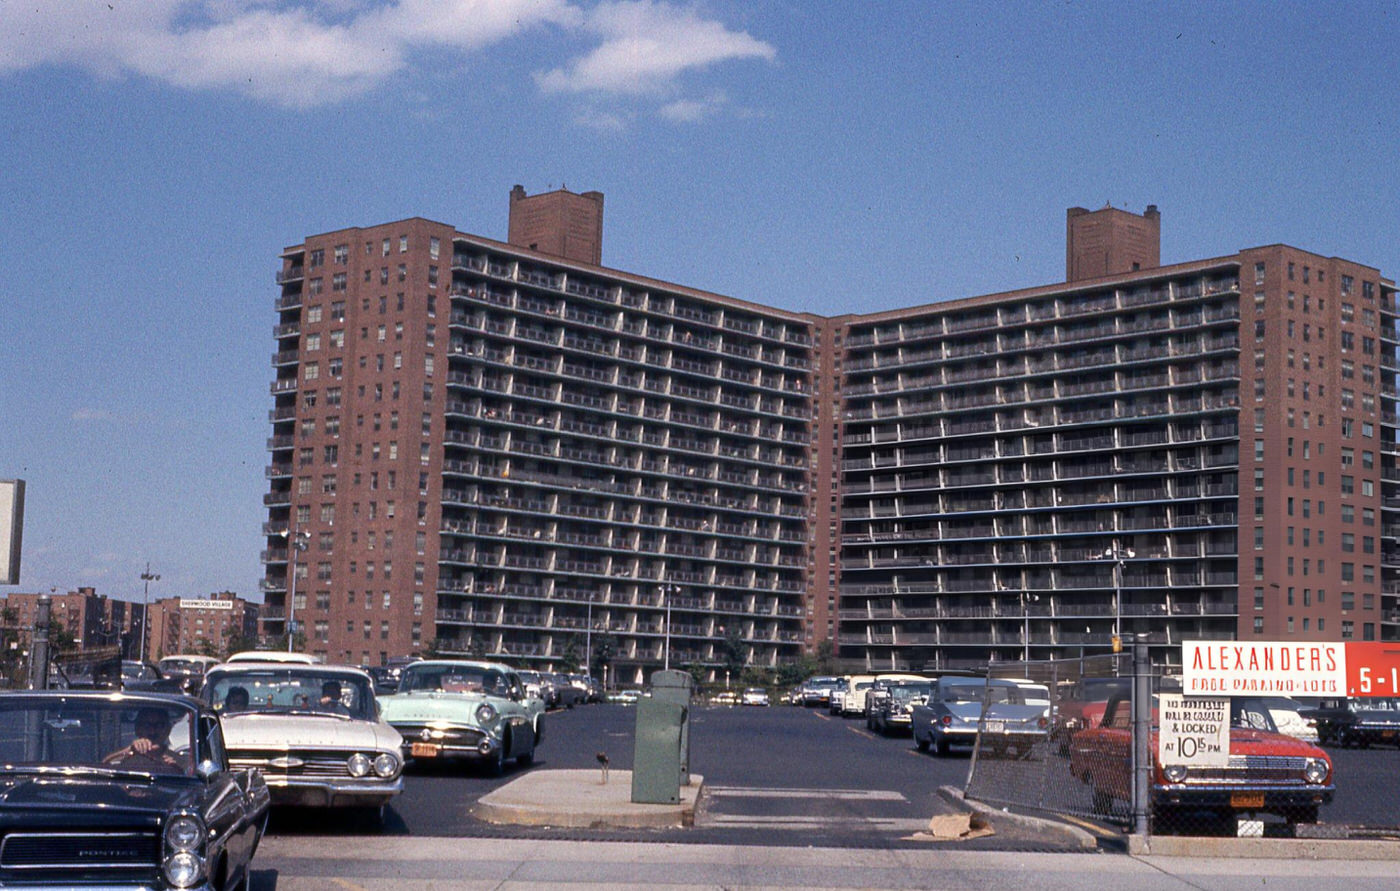 Vehicle Traffic Leaving The Parking Lot For Alexander'S Department Store In Rego Park, Queens, 1963.